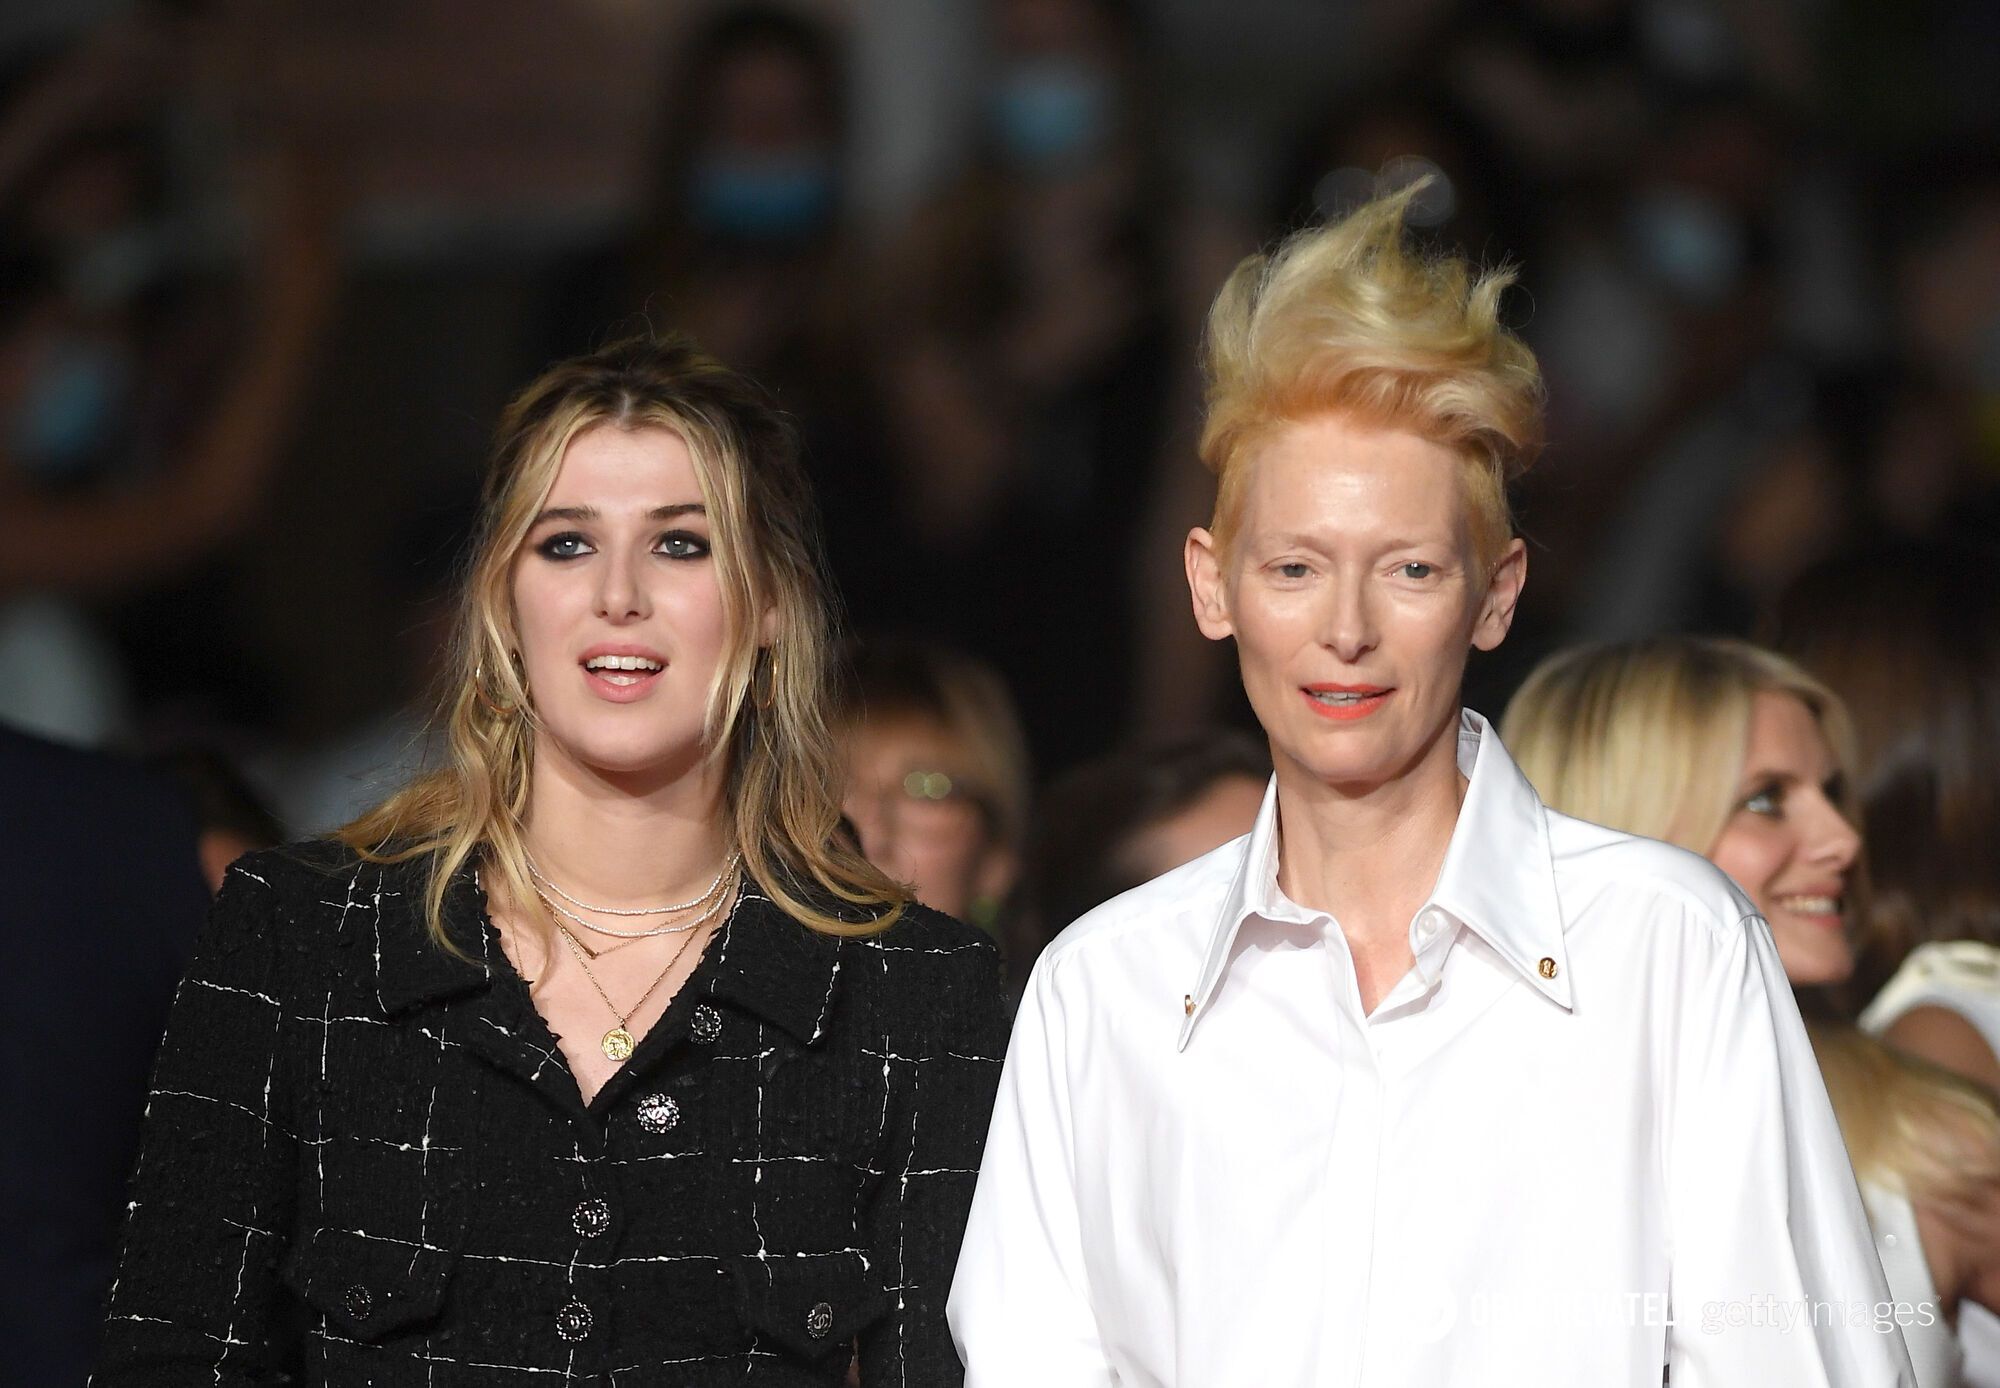 How do the children of Tilda Swinton, Meryl Streep and other stars with unconventional beauty look like. Photo